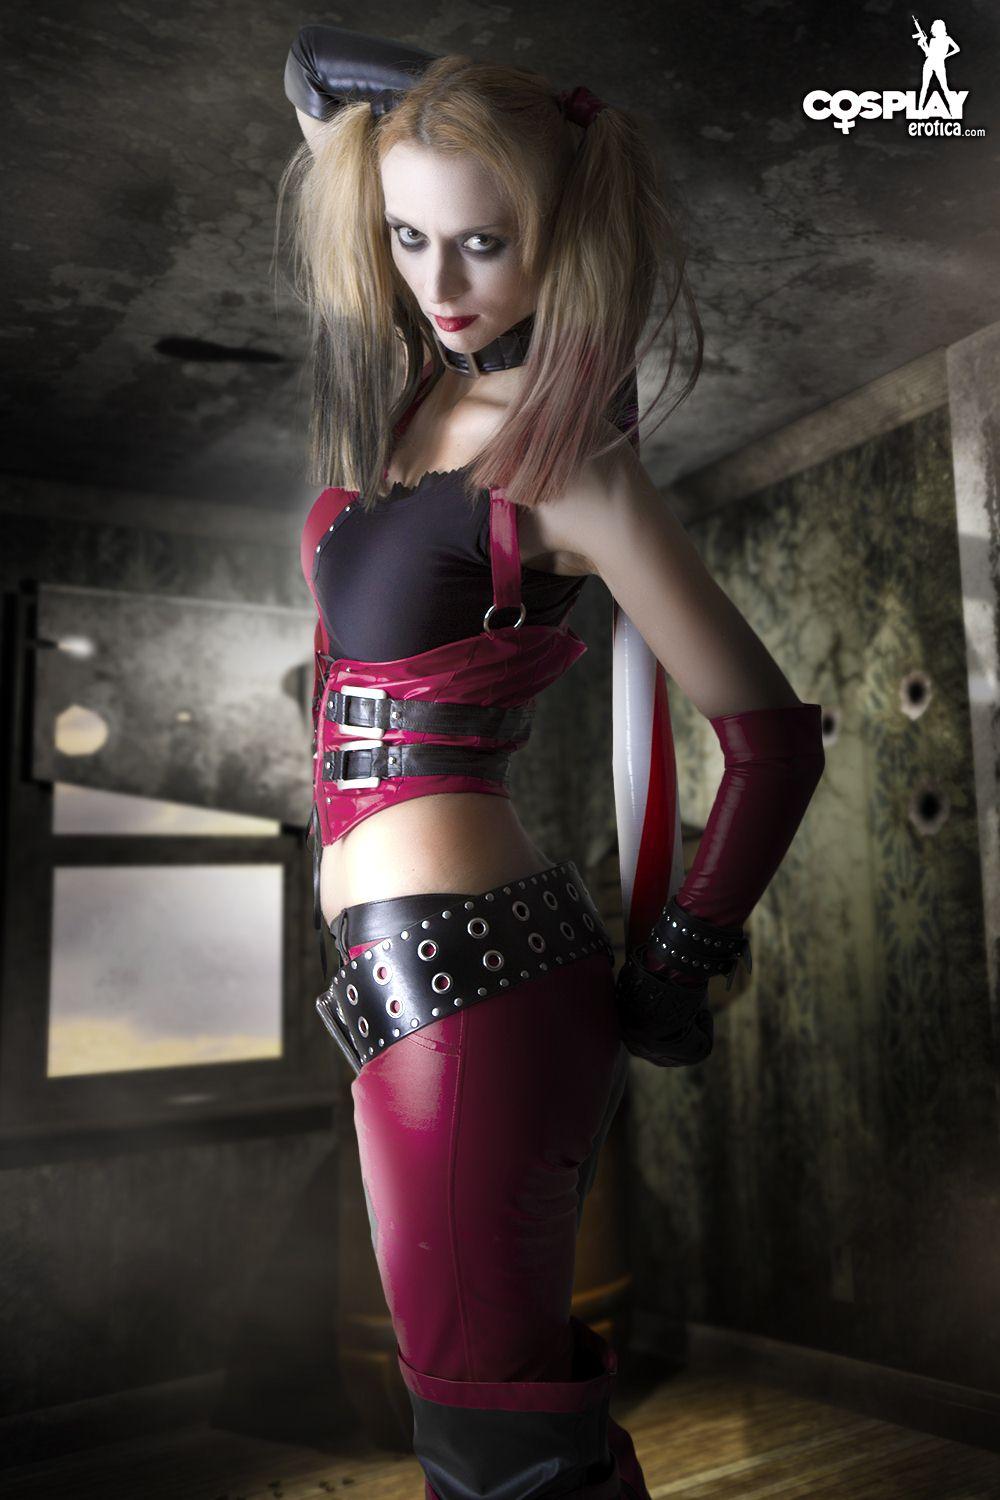 Pictures of sexy cosplayer Lana dressed as Harley Quinn from Arkham City #58814773